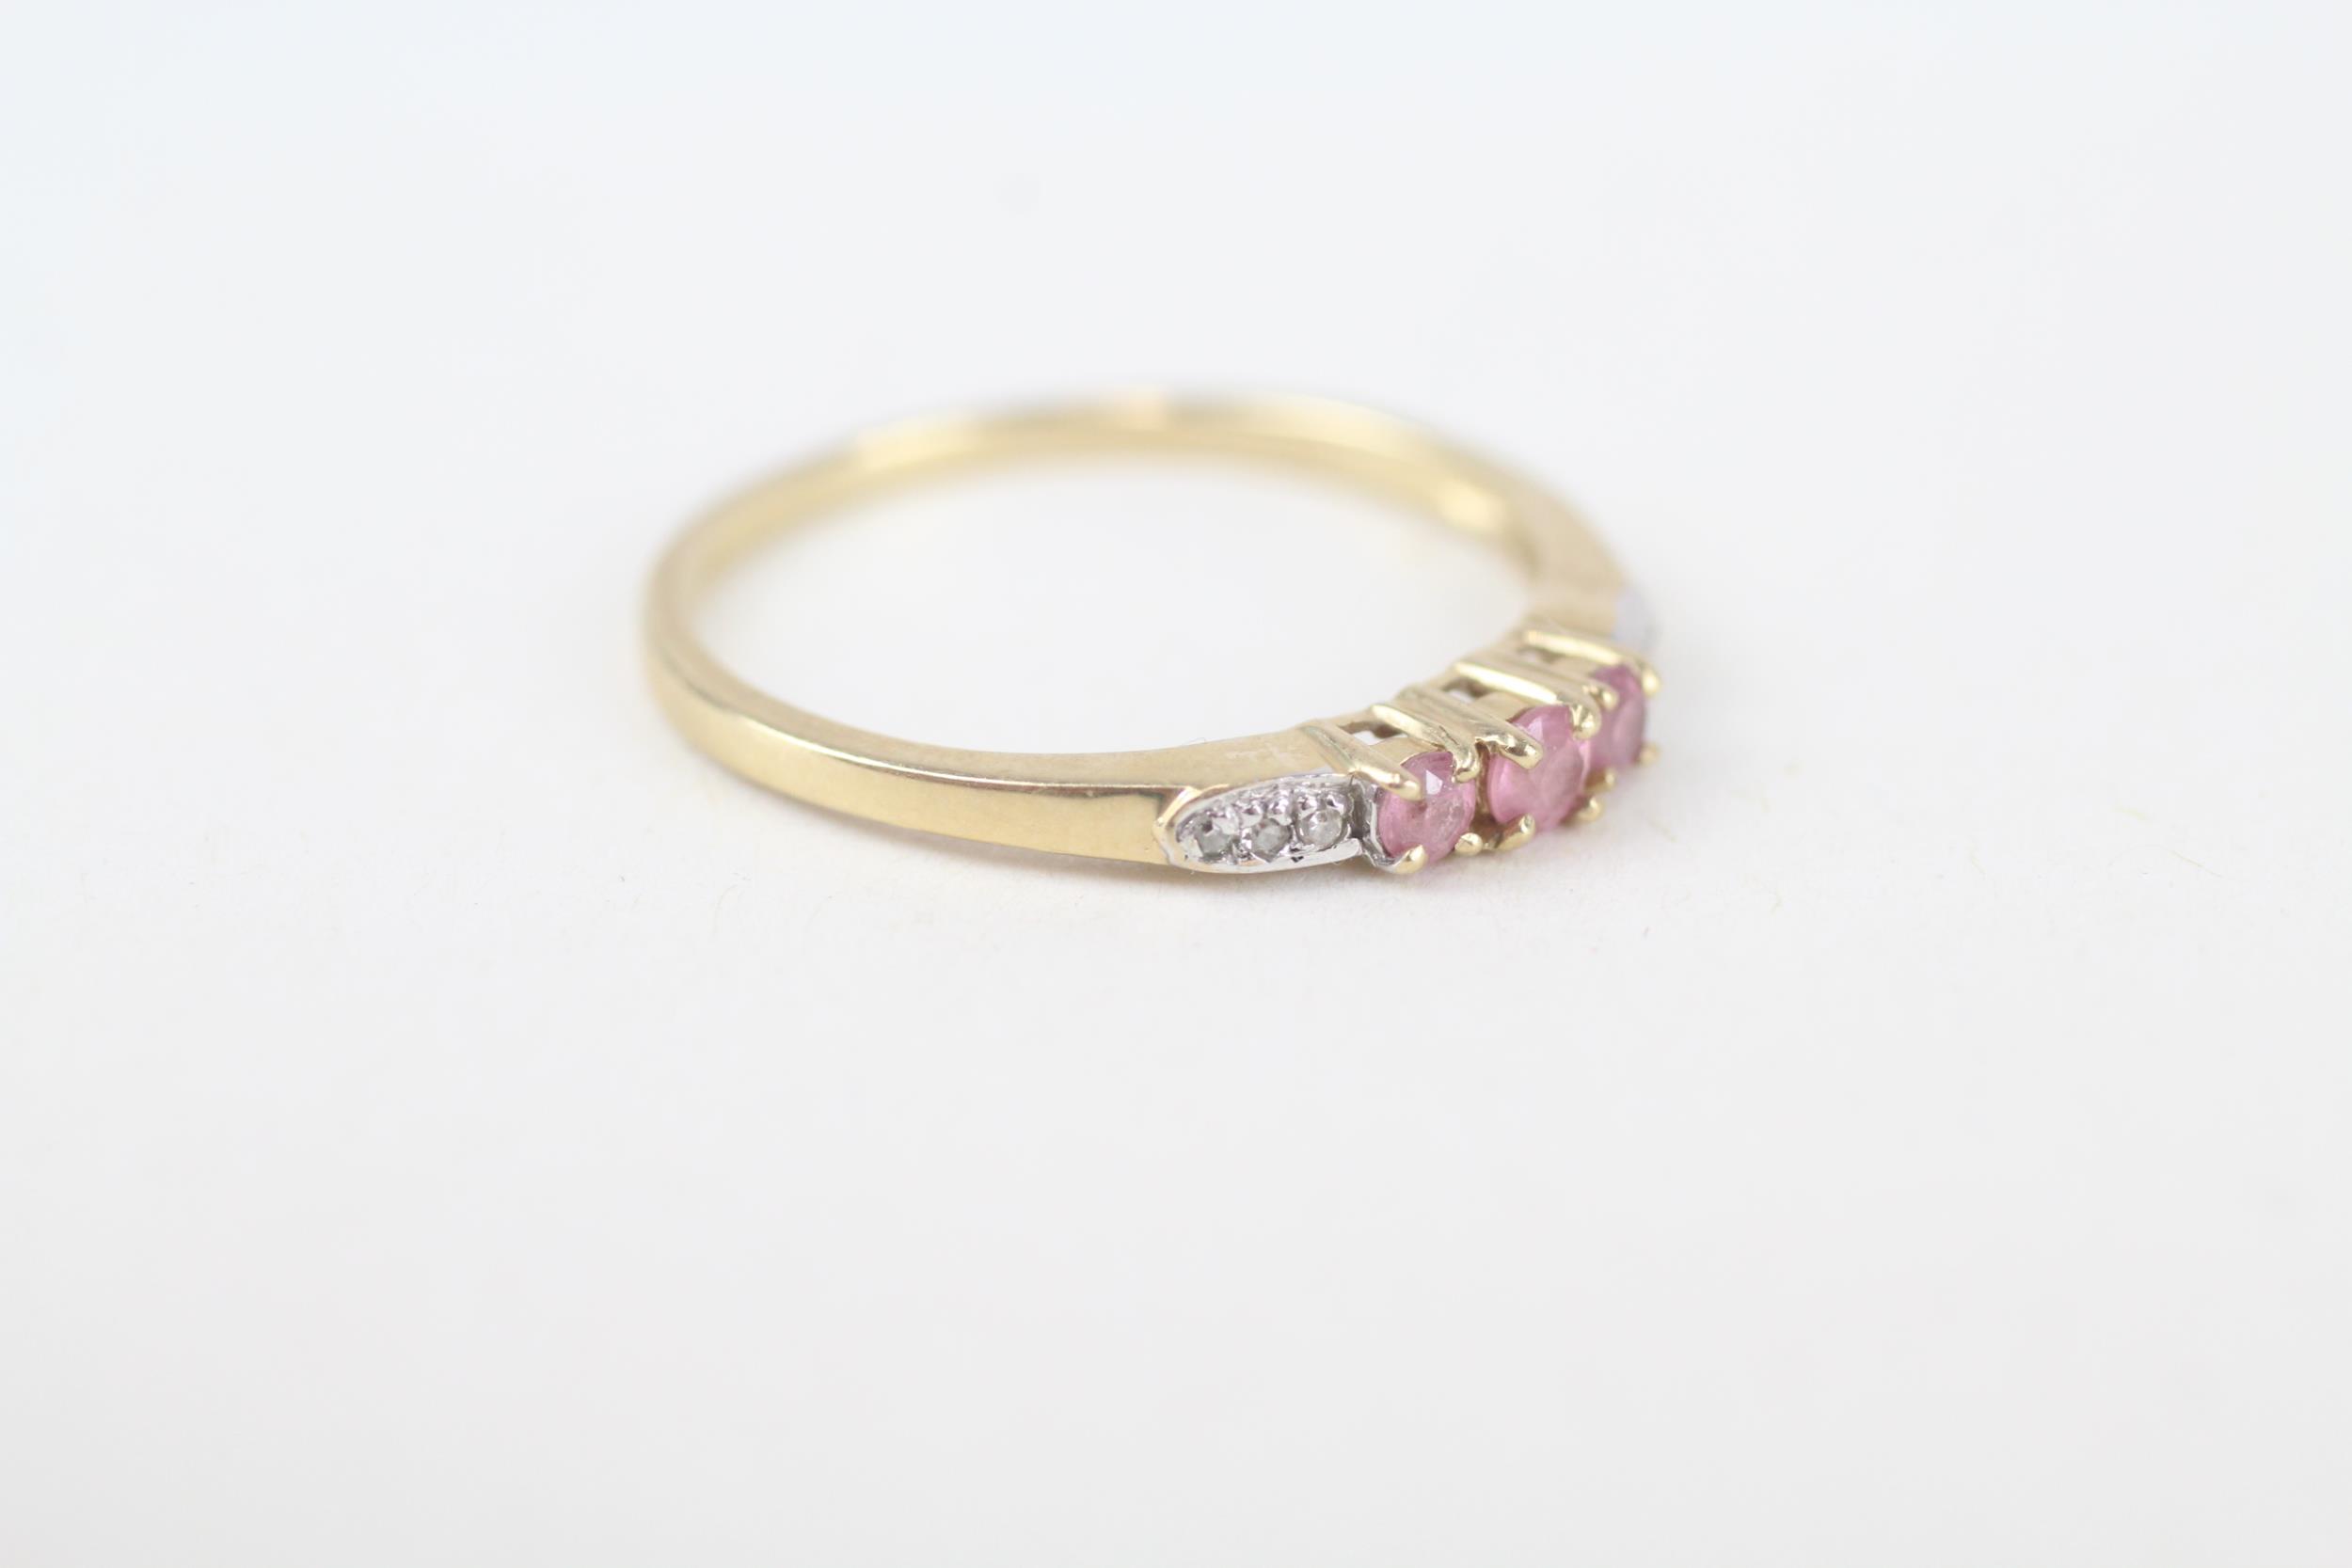 9ct gold pink diamond three stone ring with diamond sides Size N 1/2 1.2 g - Image 3 of 5